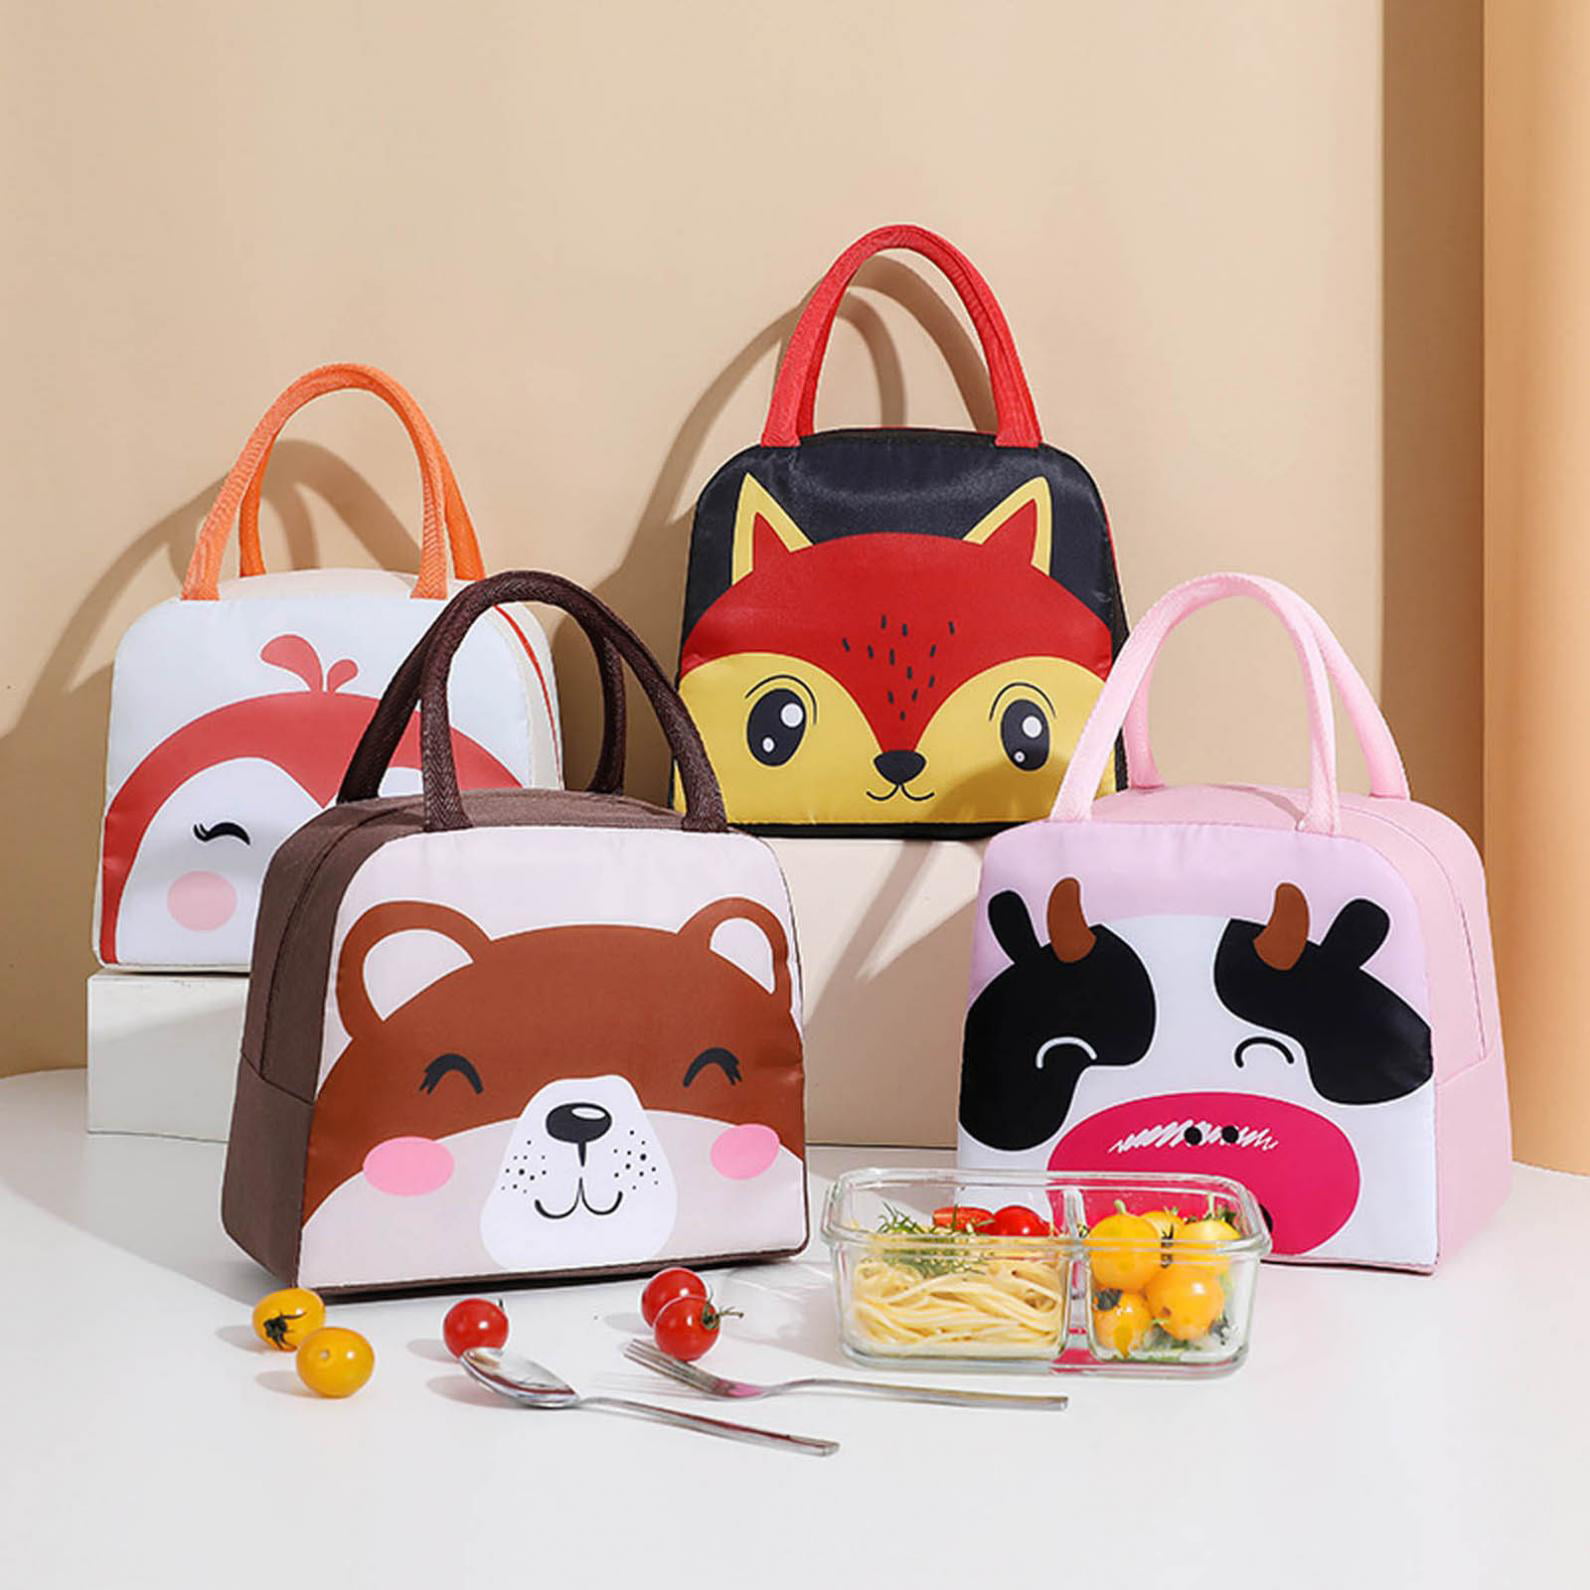 Best Cute Lunchbox: 23 Boxes, Bags and Flasks